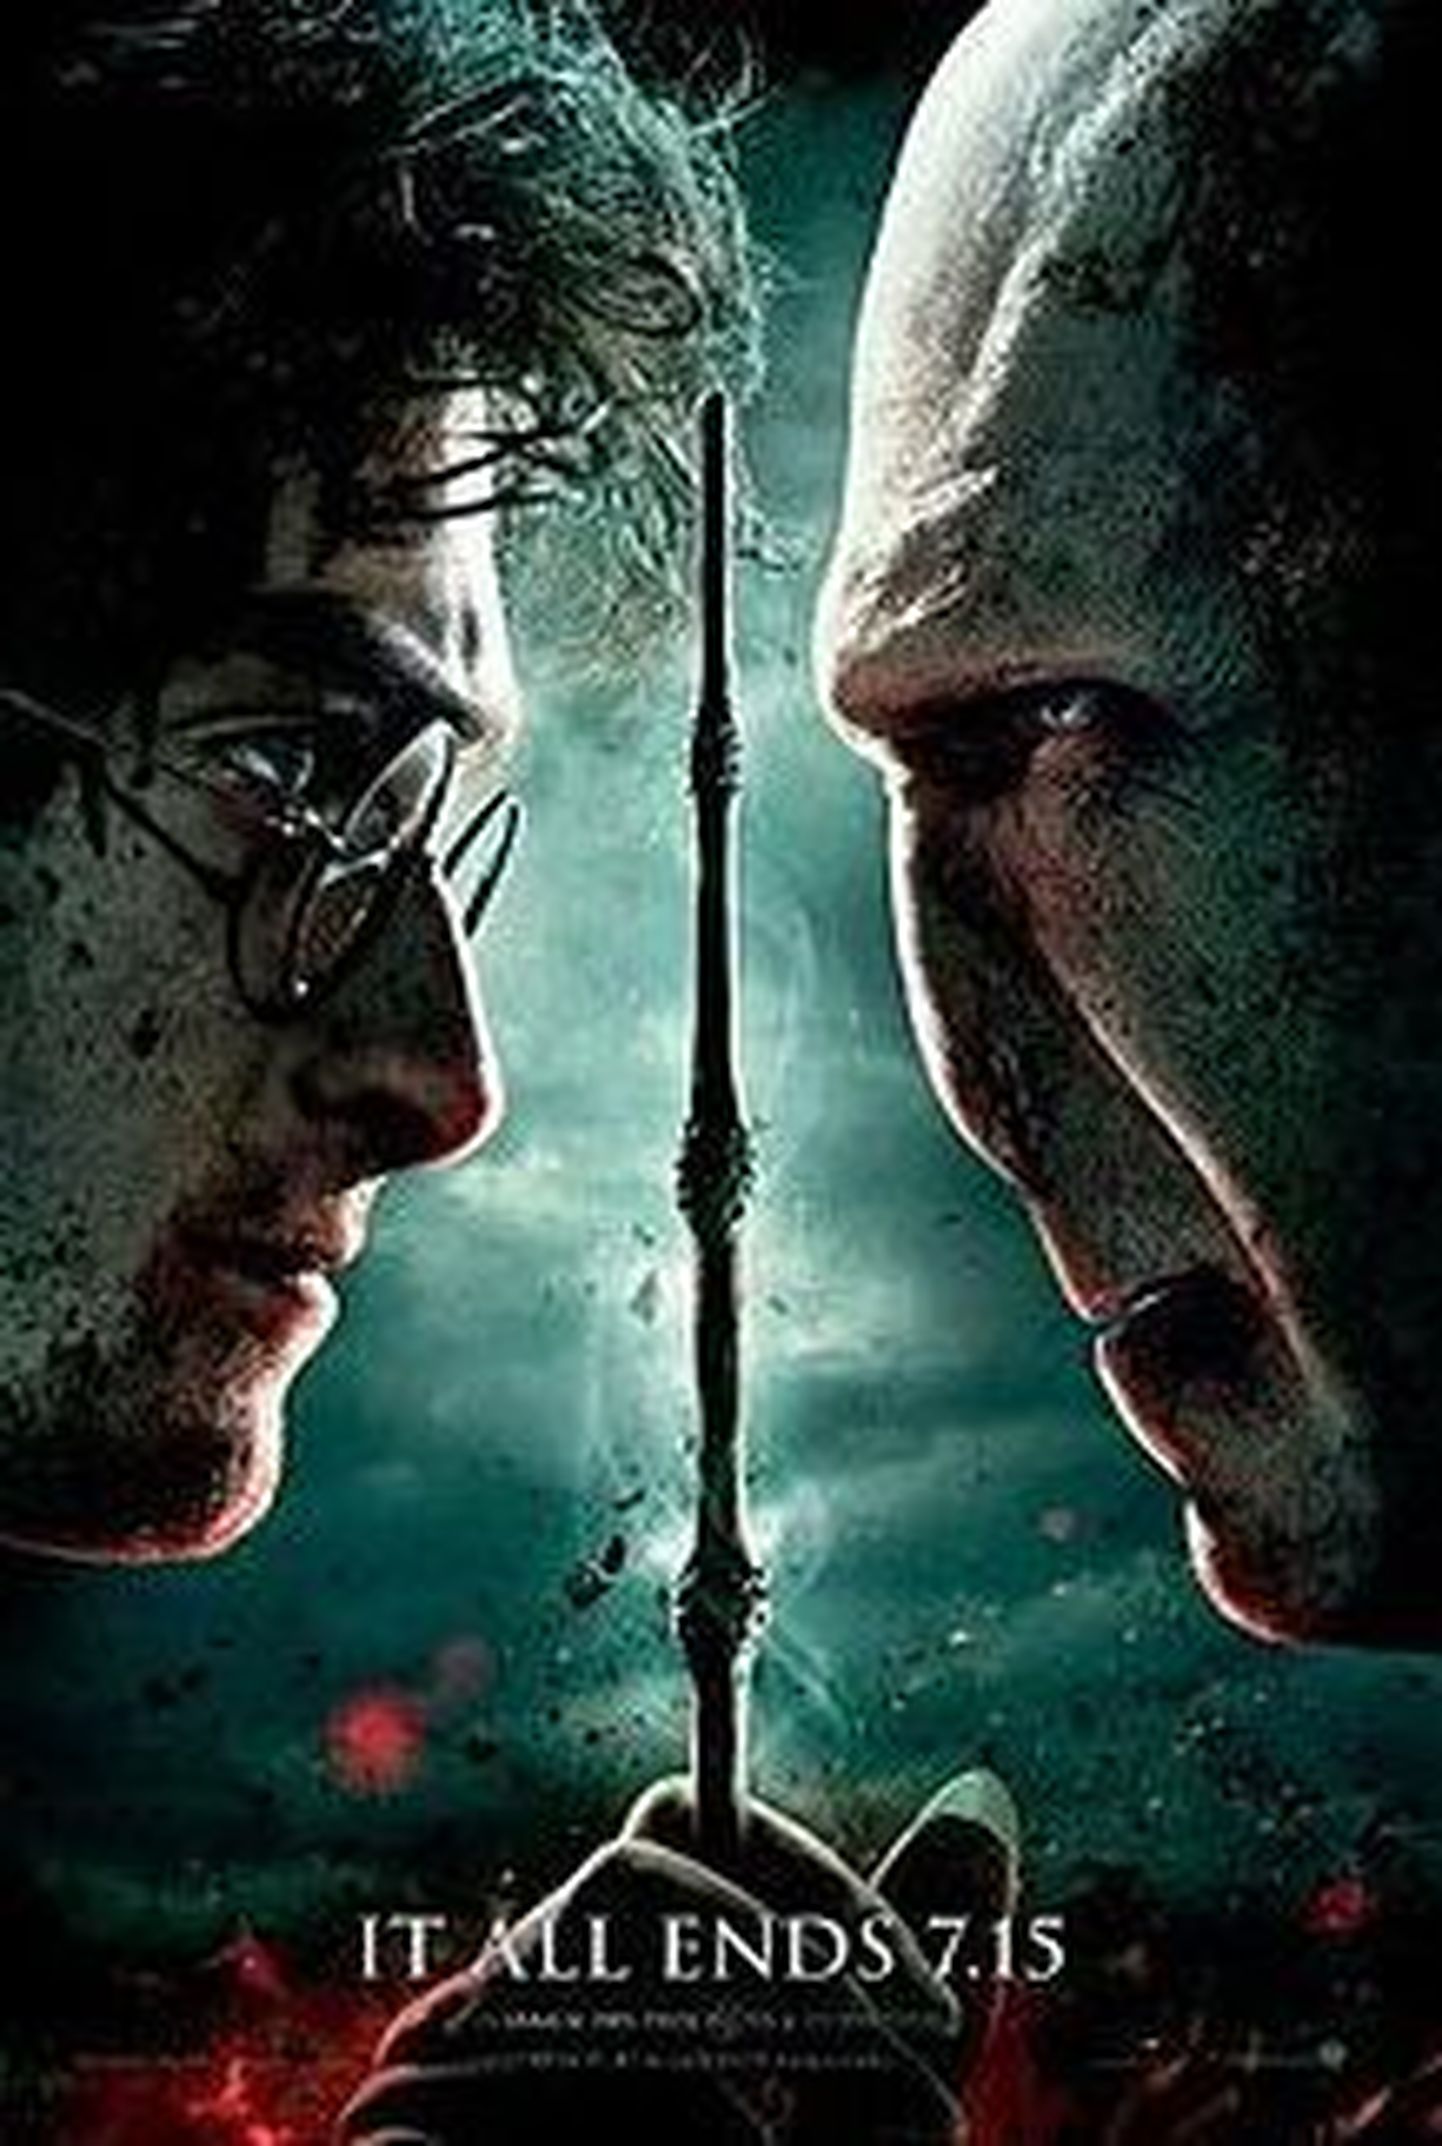 Filmi «Harry Potter and the Deathly Hallows- Part 2» reklaamplakat